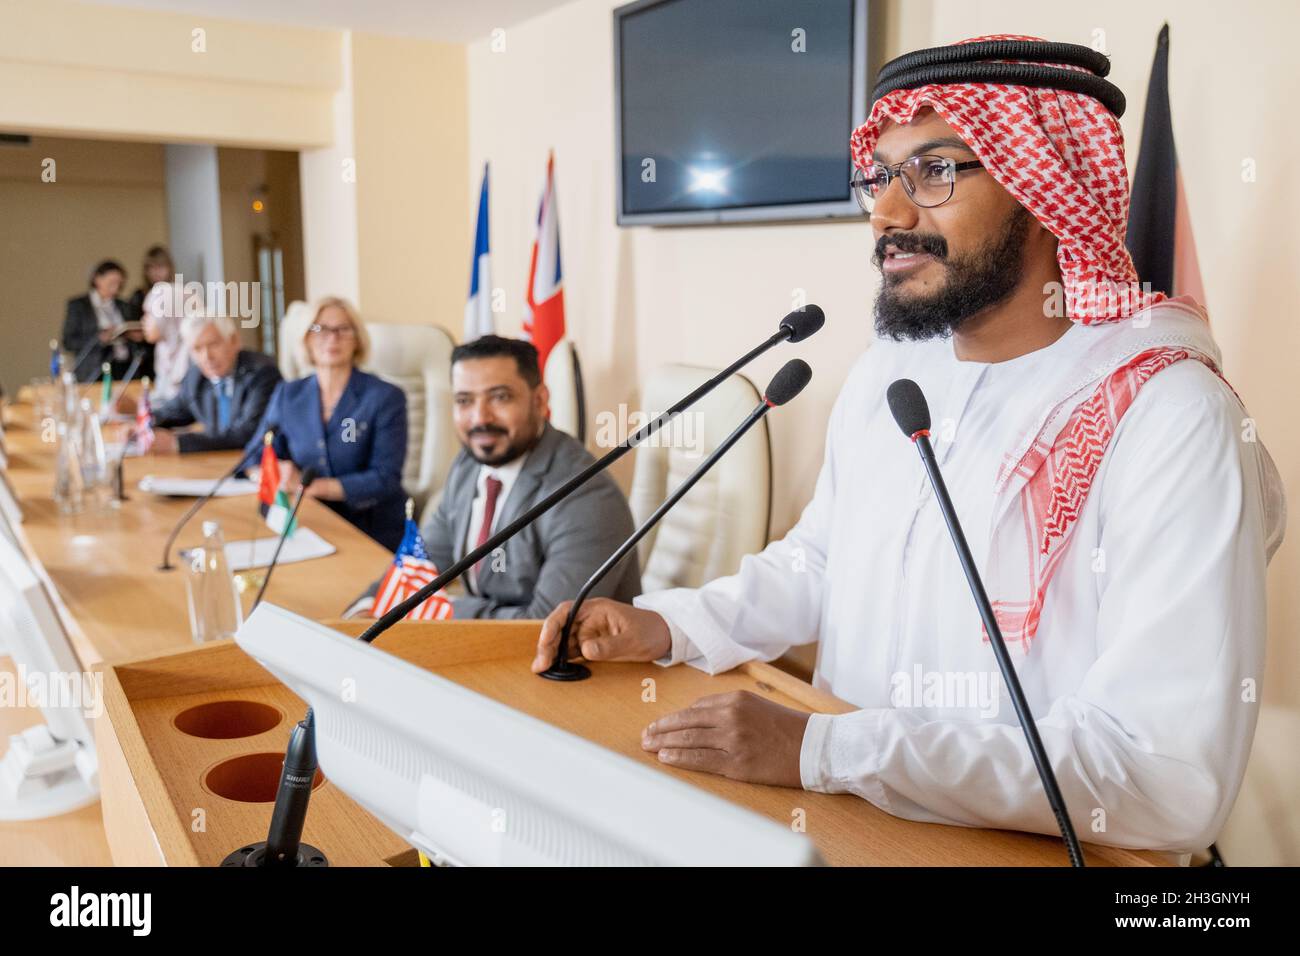 Smiling Muslim politician in ghutrah and agal standing at rostrum podium and speaking in public using mucrophone at international conference Stock Photo